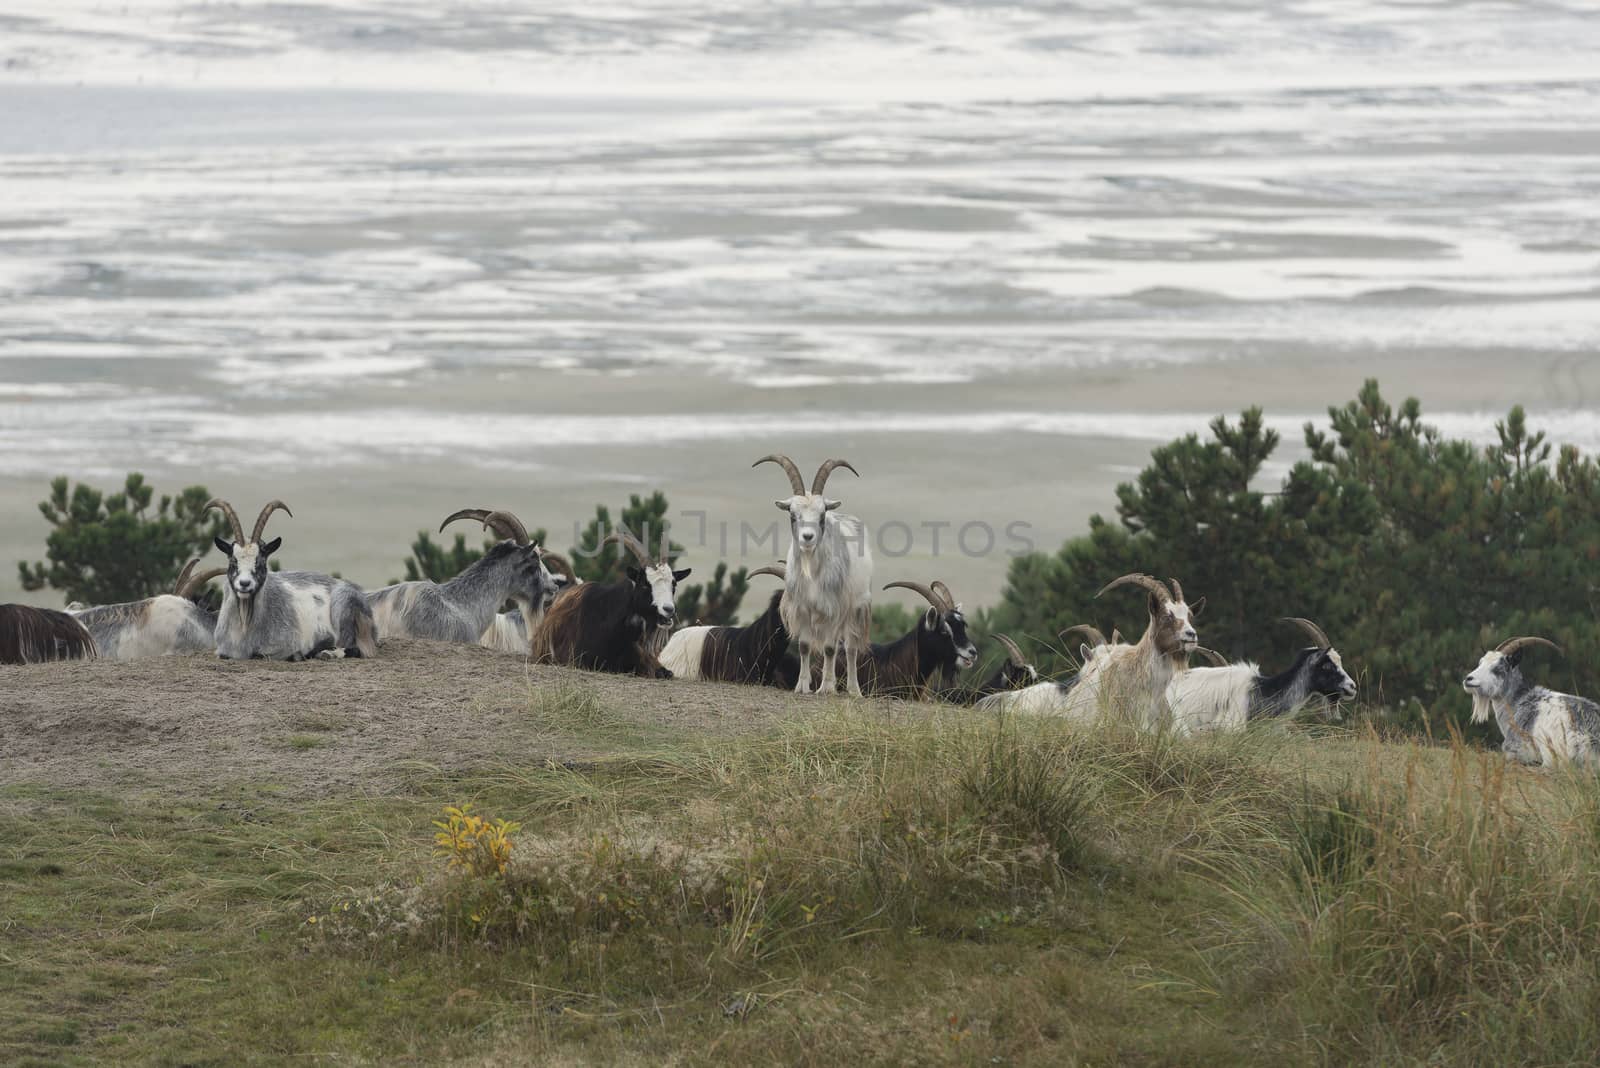 The dunes on the North Sea Island of Terschelling grazed by goats to maintain visibility and to prevent forest growth
